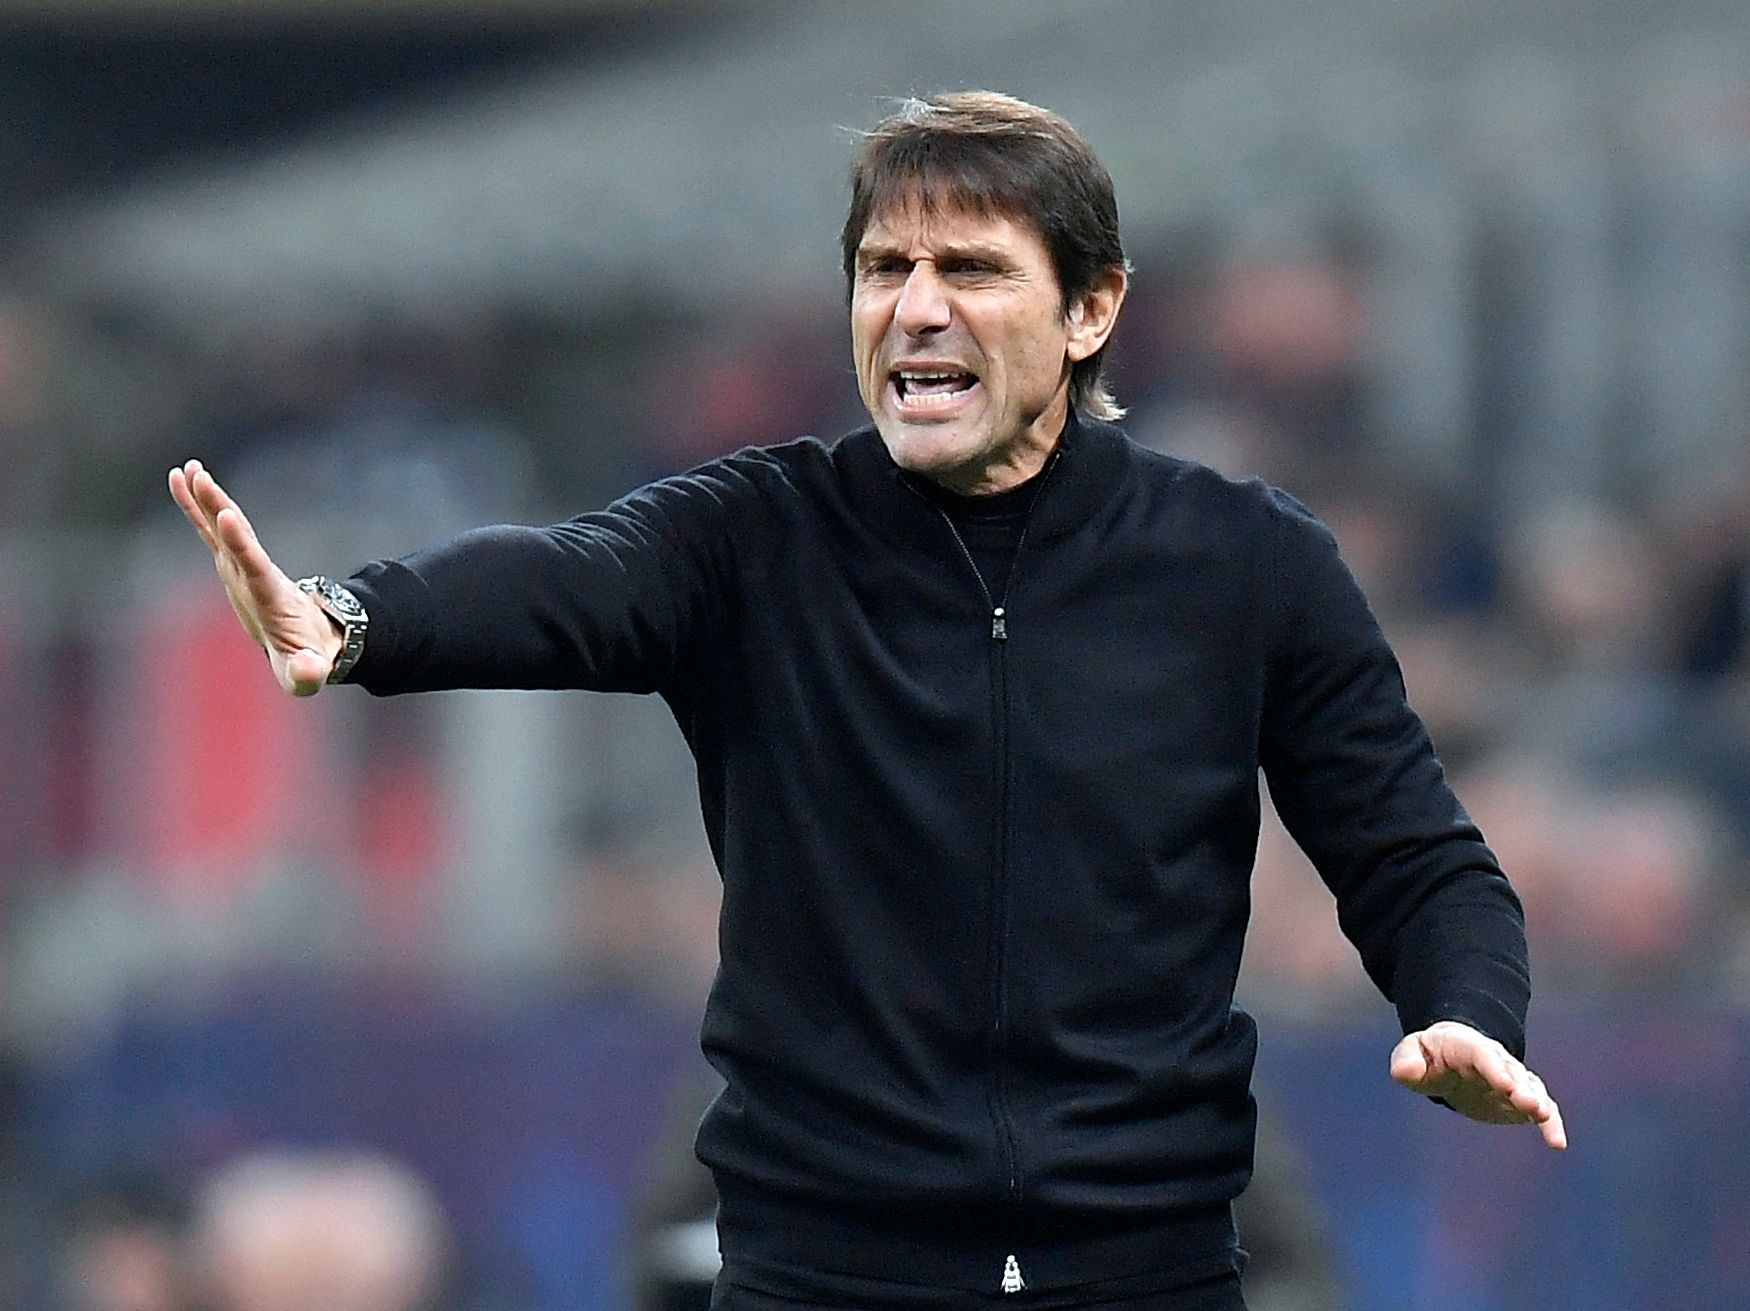 Tottenham Hotspur manager Antonio Conte giving out instructions